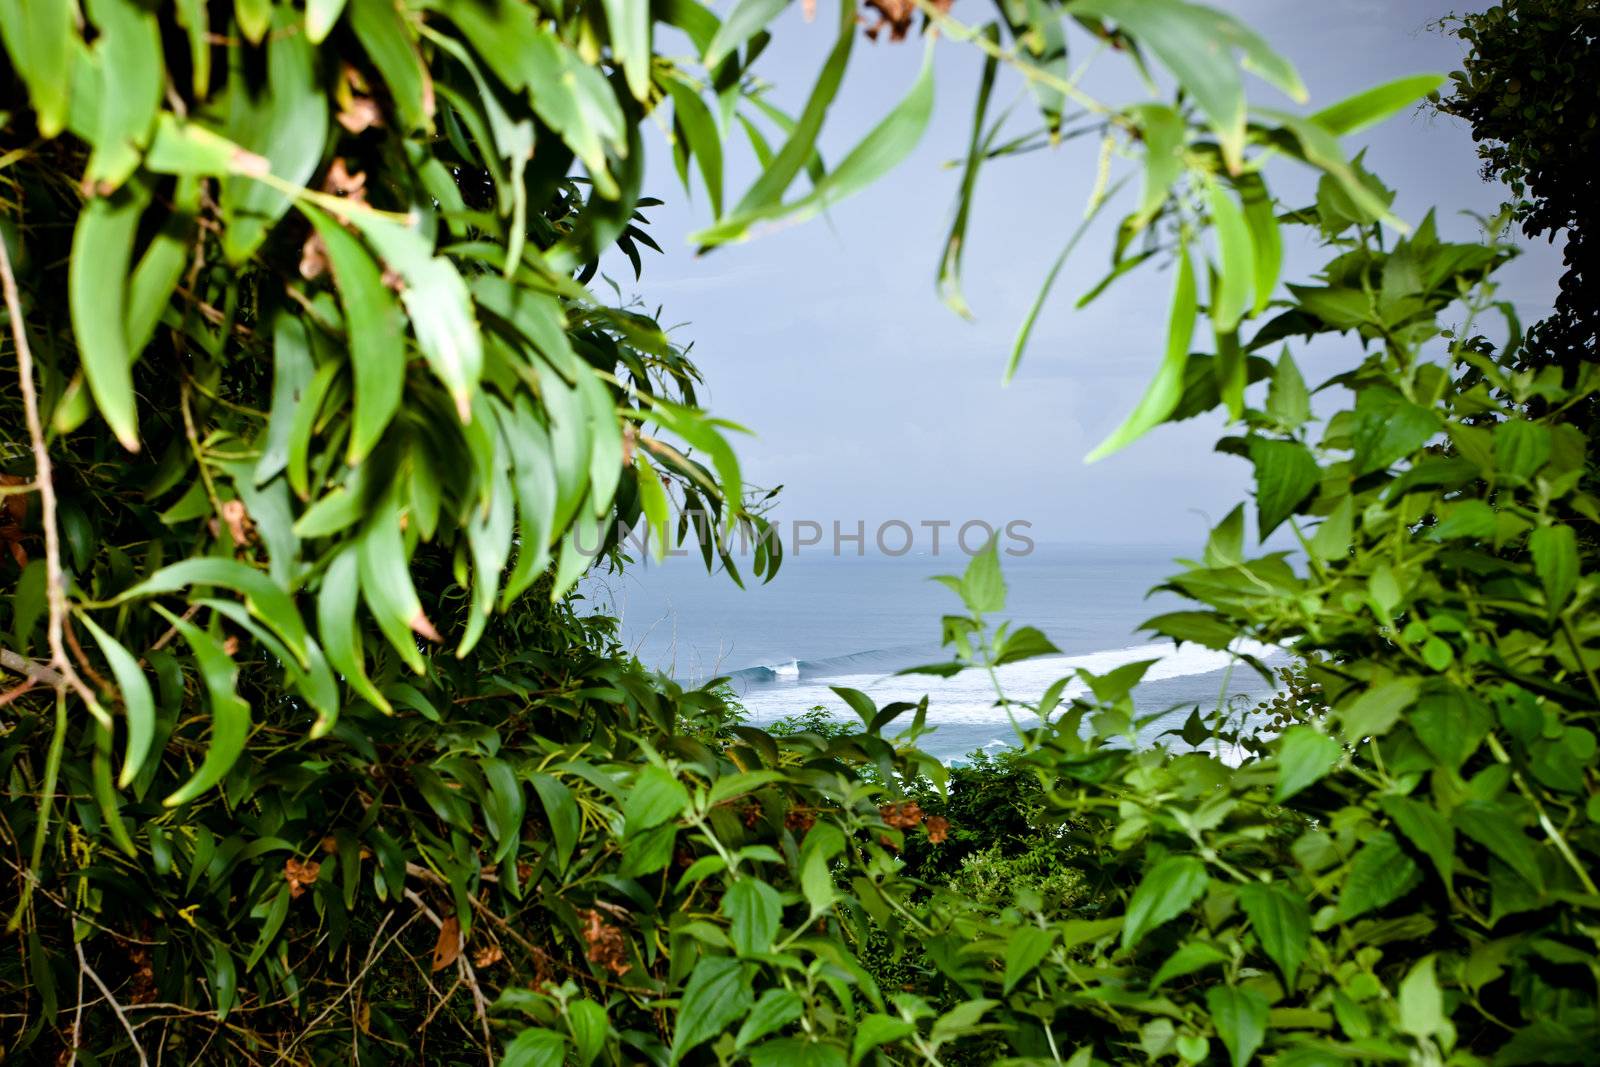 View of the ocean and breaking waves through a gap in lush green tropical leaves and foliage